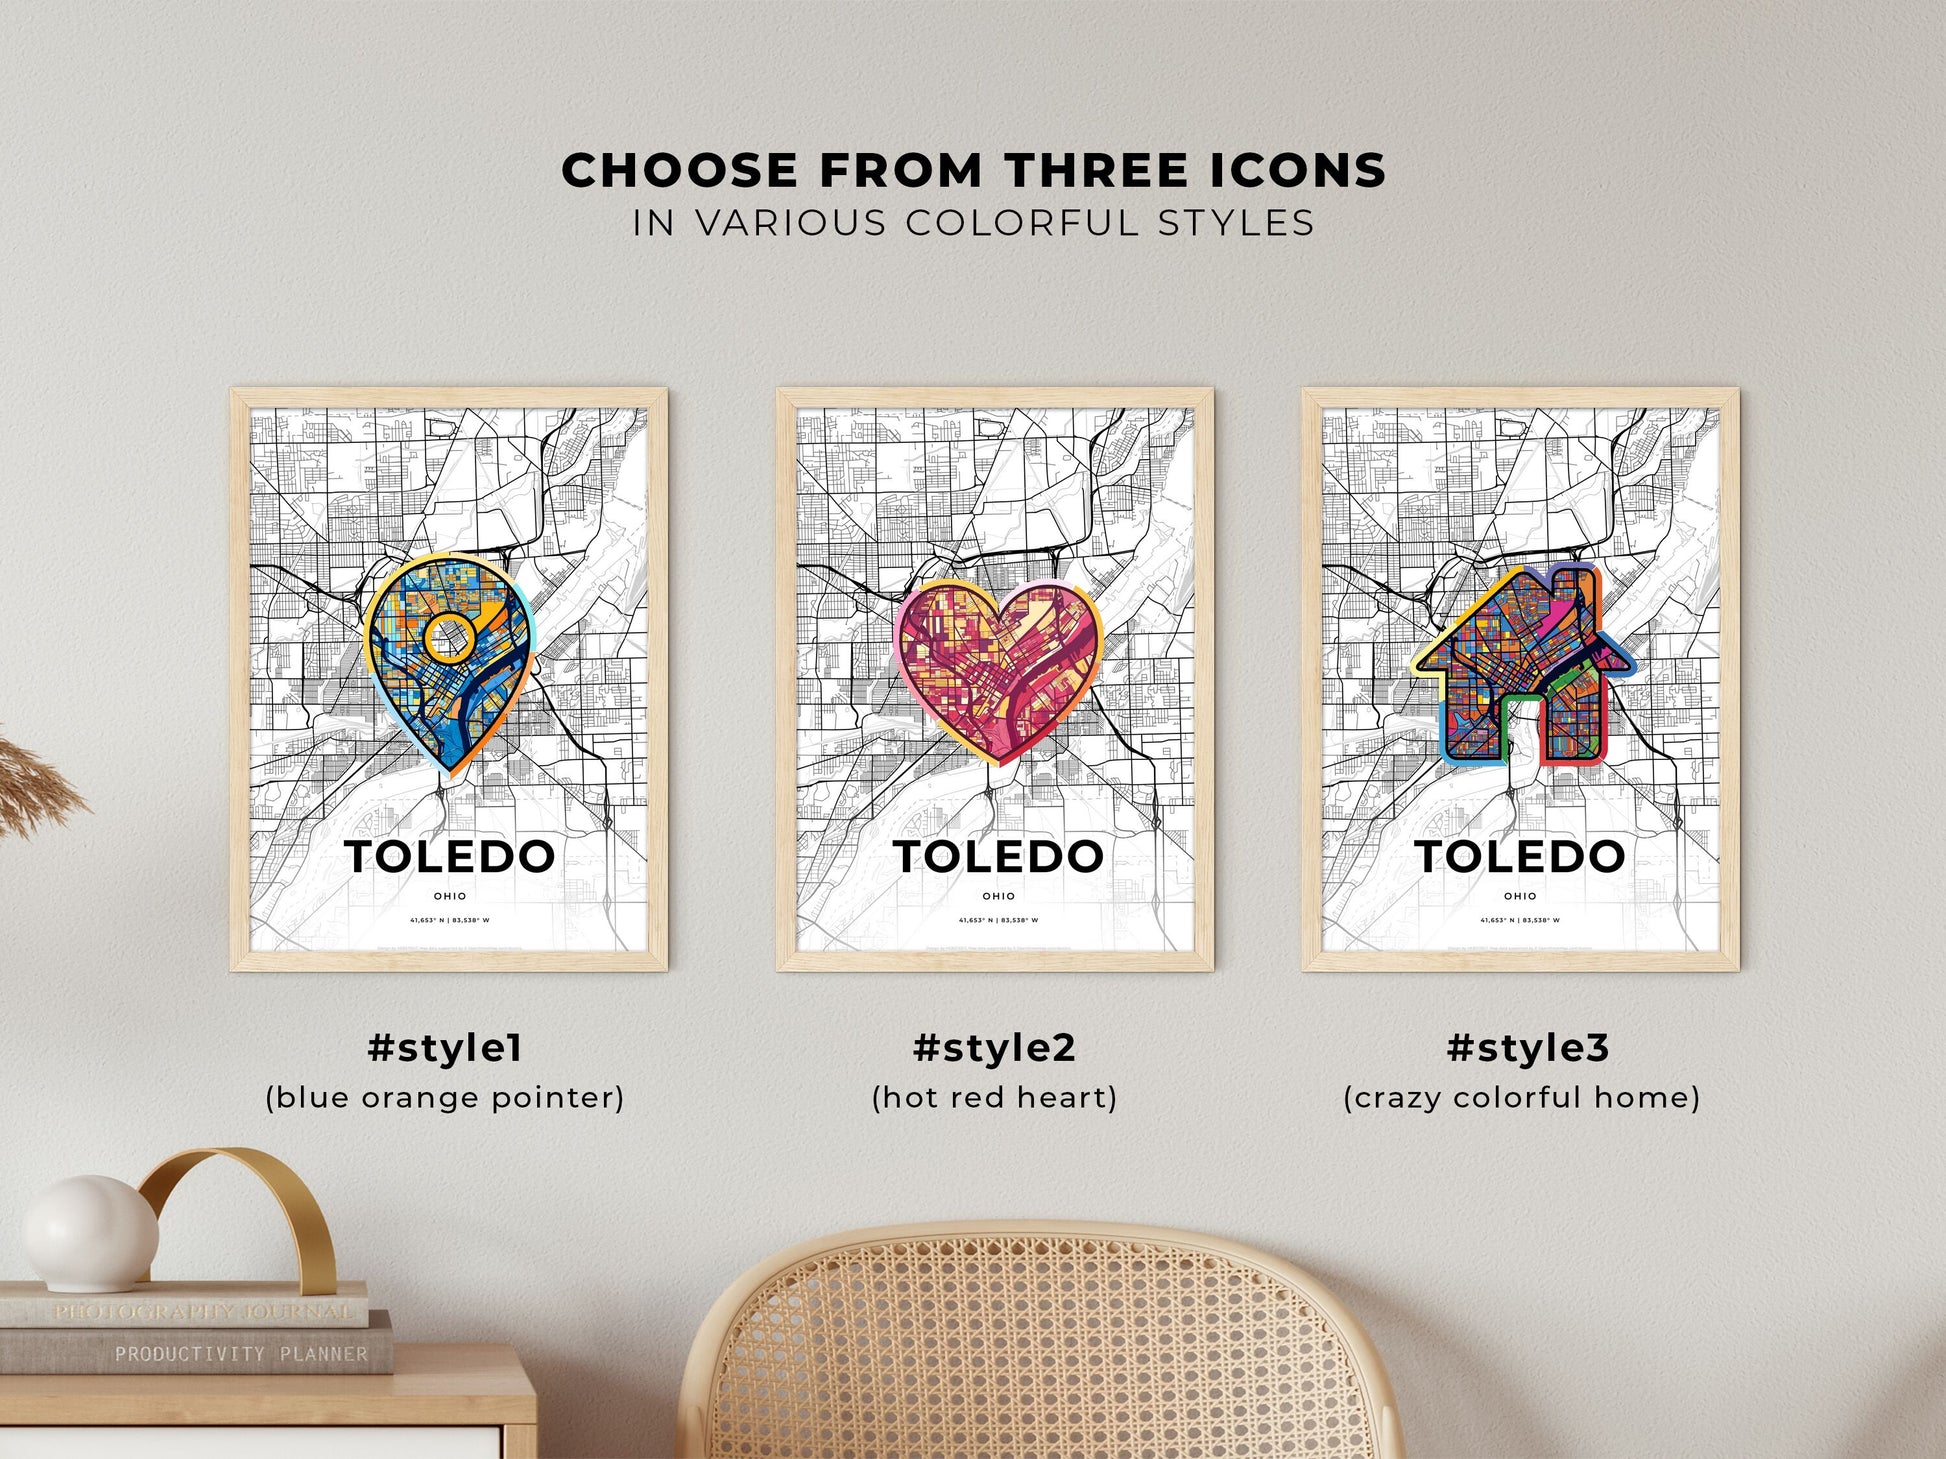 TOLEDO OHIO minimal art map with a colorful icon. Where it all began, Couple map gift.